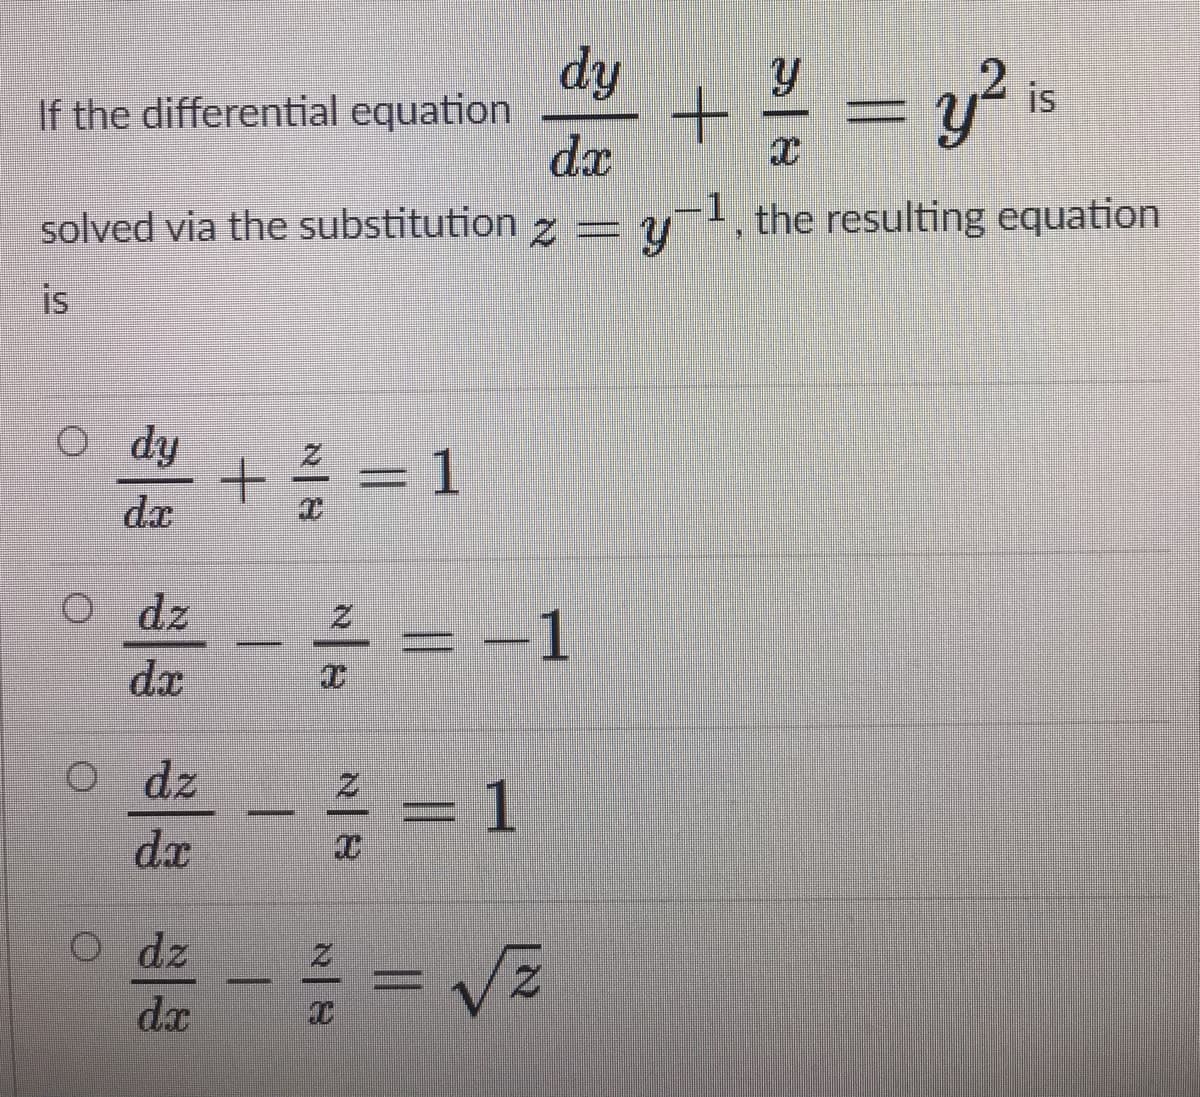 dy
If the differential equation
dx
1
solved via the substitution z =
is
the resulting equation
is
O dy
=D1
O dz
1
dx
o dz
3D1
dx
O dz
dx
9一2
